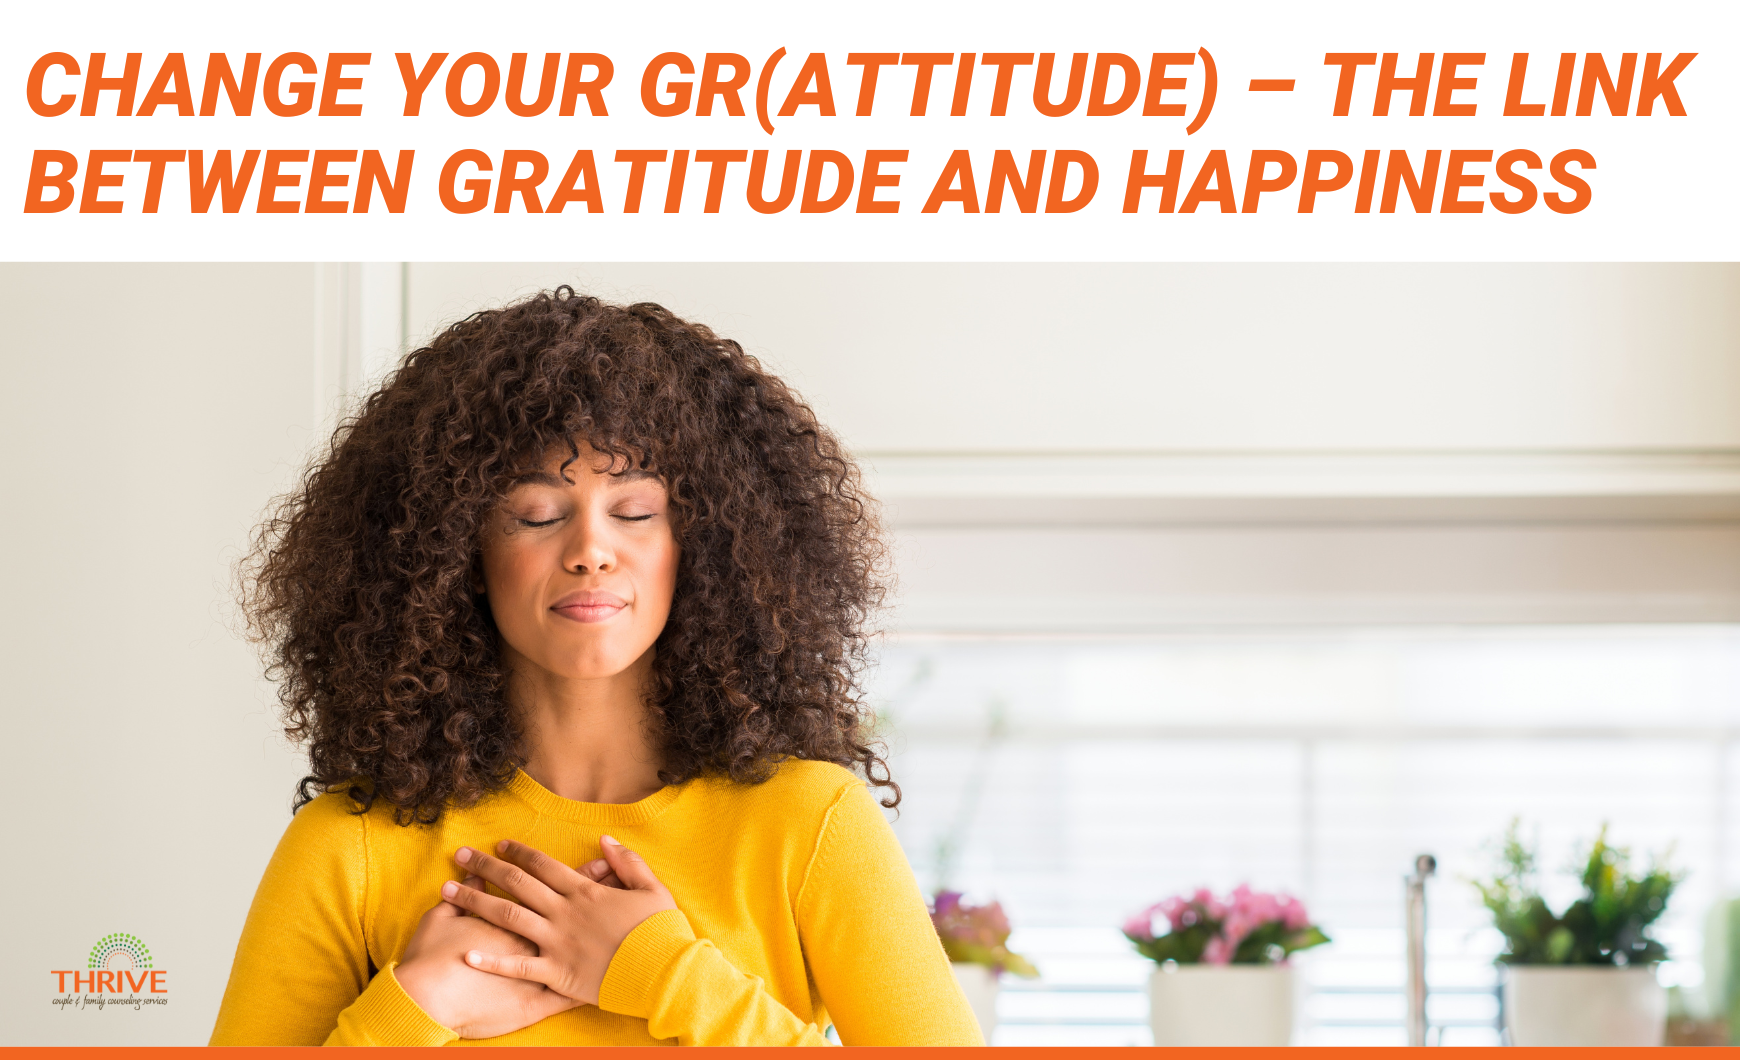 Orange text on a white background that reads "Change your Gr(Attitude) - The Link Between Gratitude and Happiness" above a photo of a Black woman in a yellow long sleeved shirt with her hands over her heart and her eyes closed.